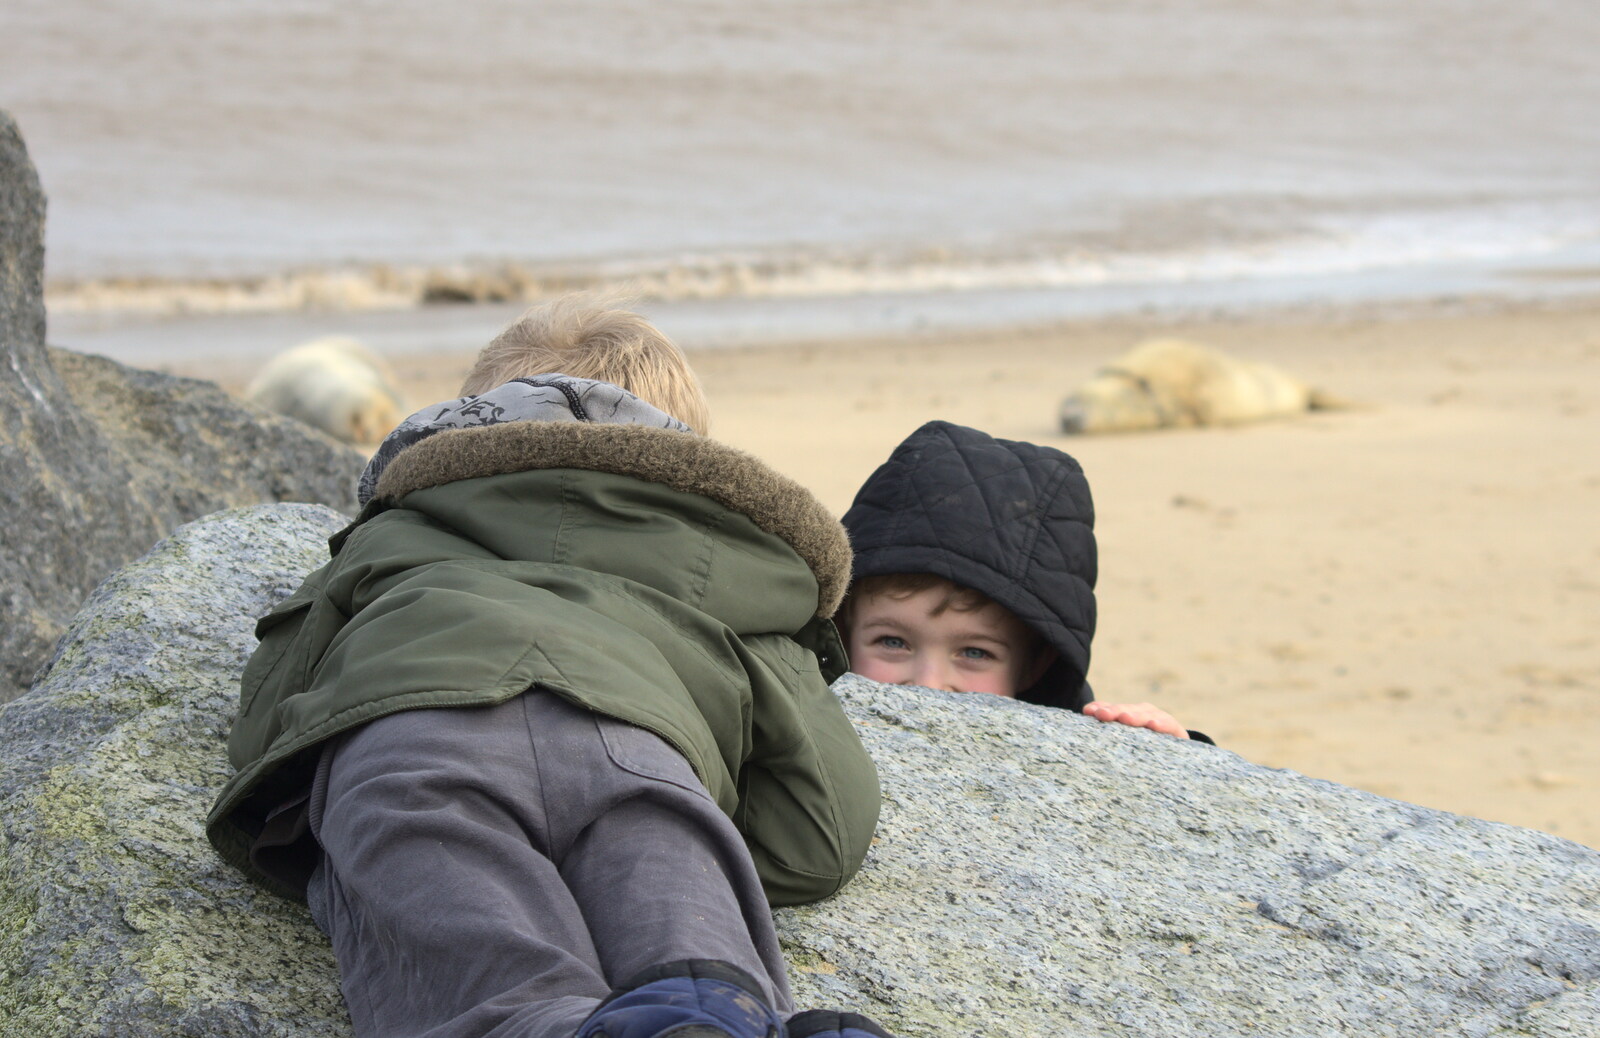 Harry and Fred mess around from The Seals of Horsey Gap, Norfolk - 21st February 2016